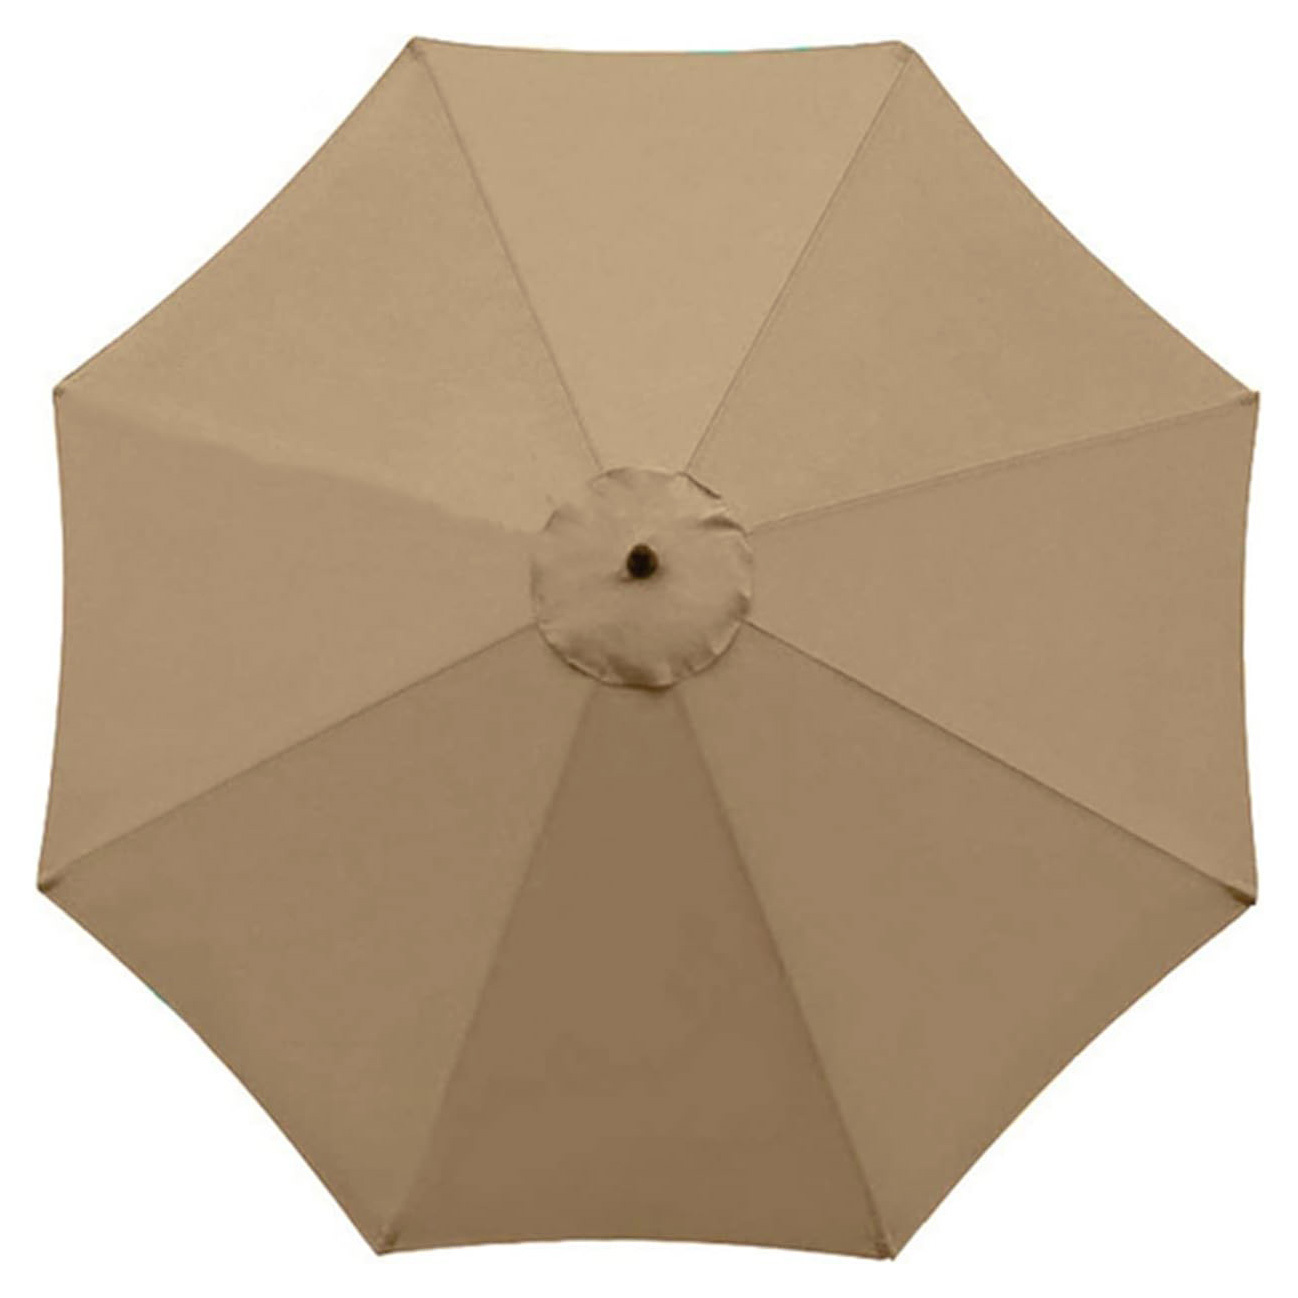 3m Patio Umbrella Replacement Cover 10ft 8 Ribs Large Outdoor Canopy (Beige)